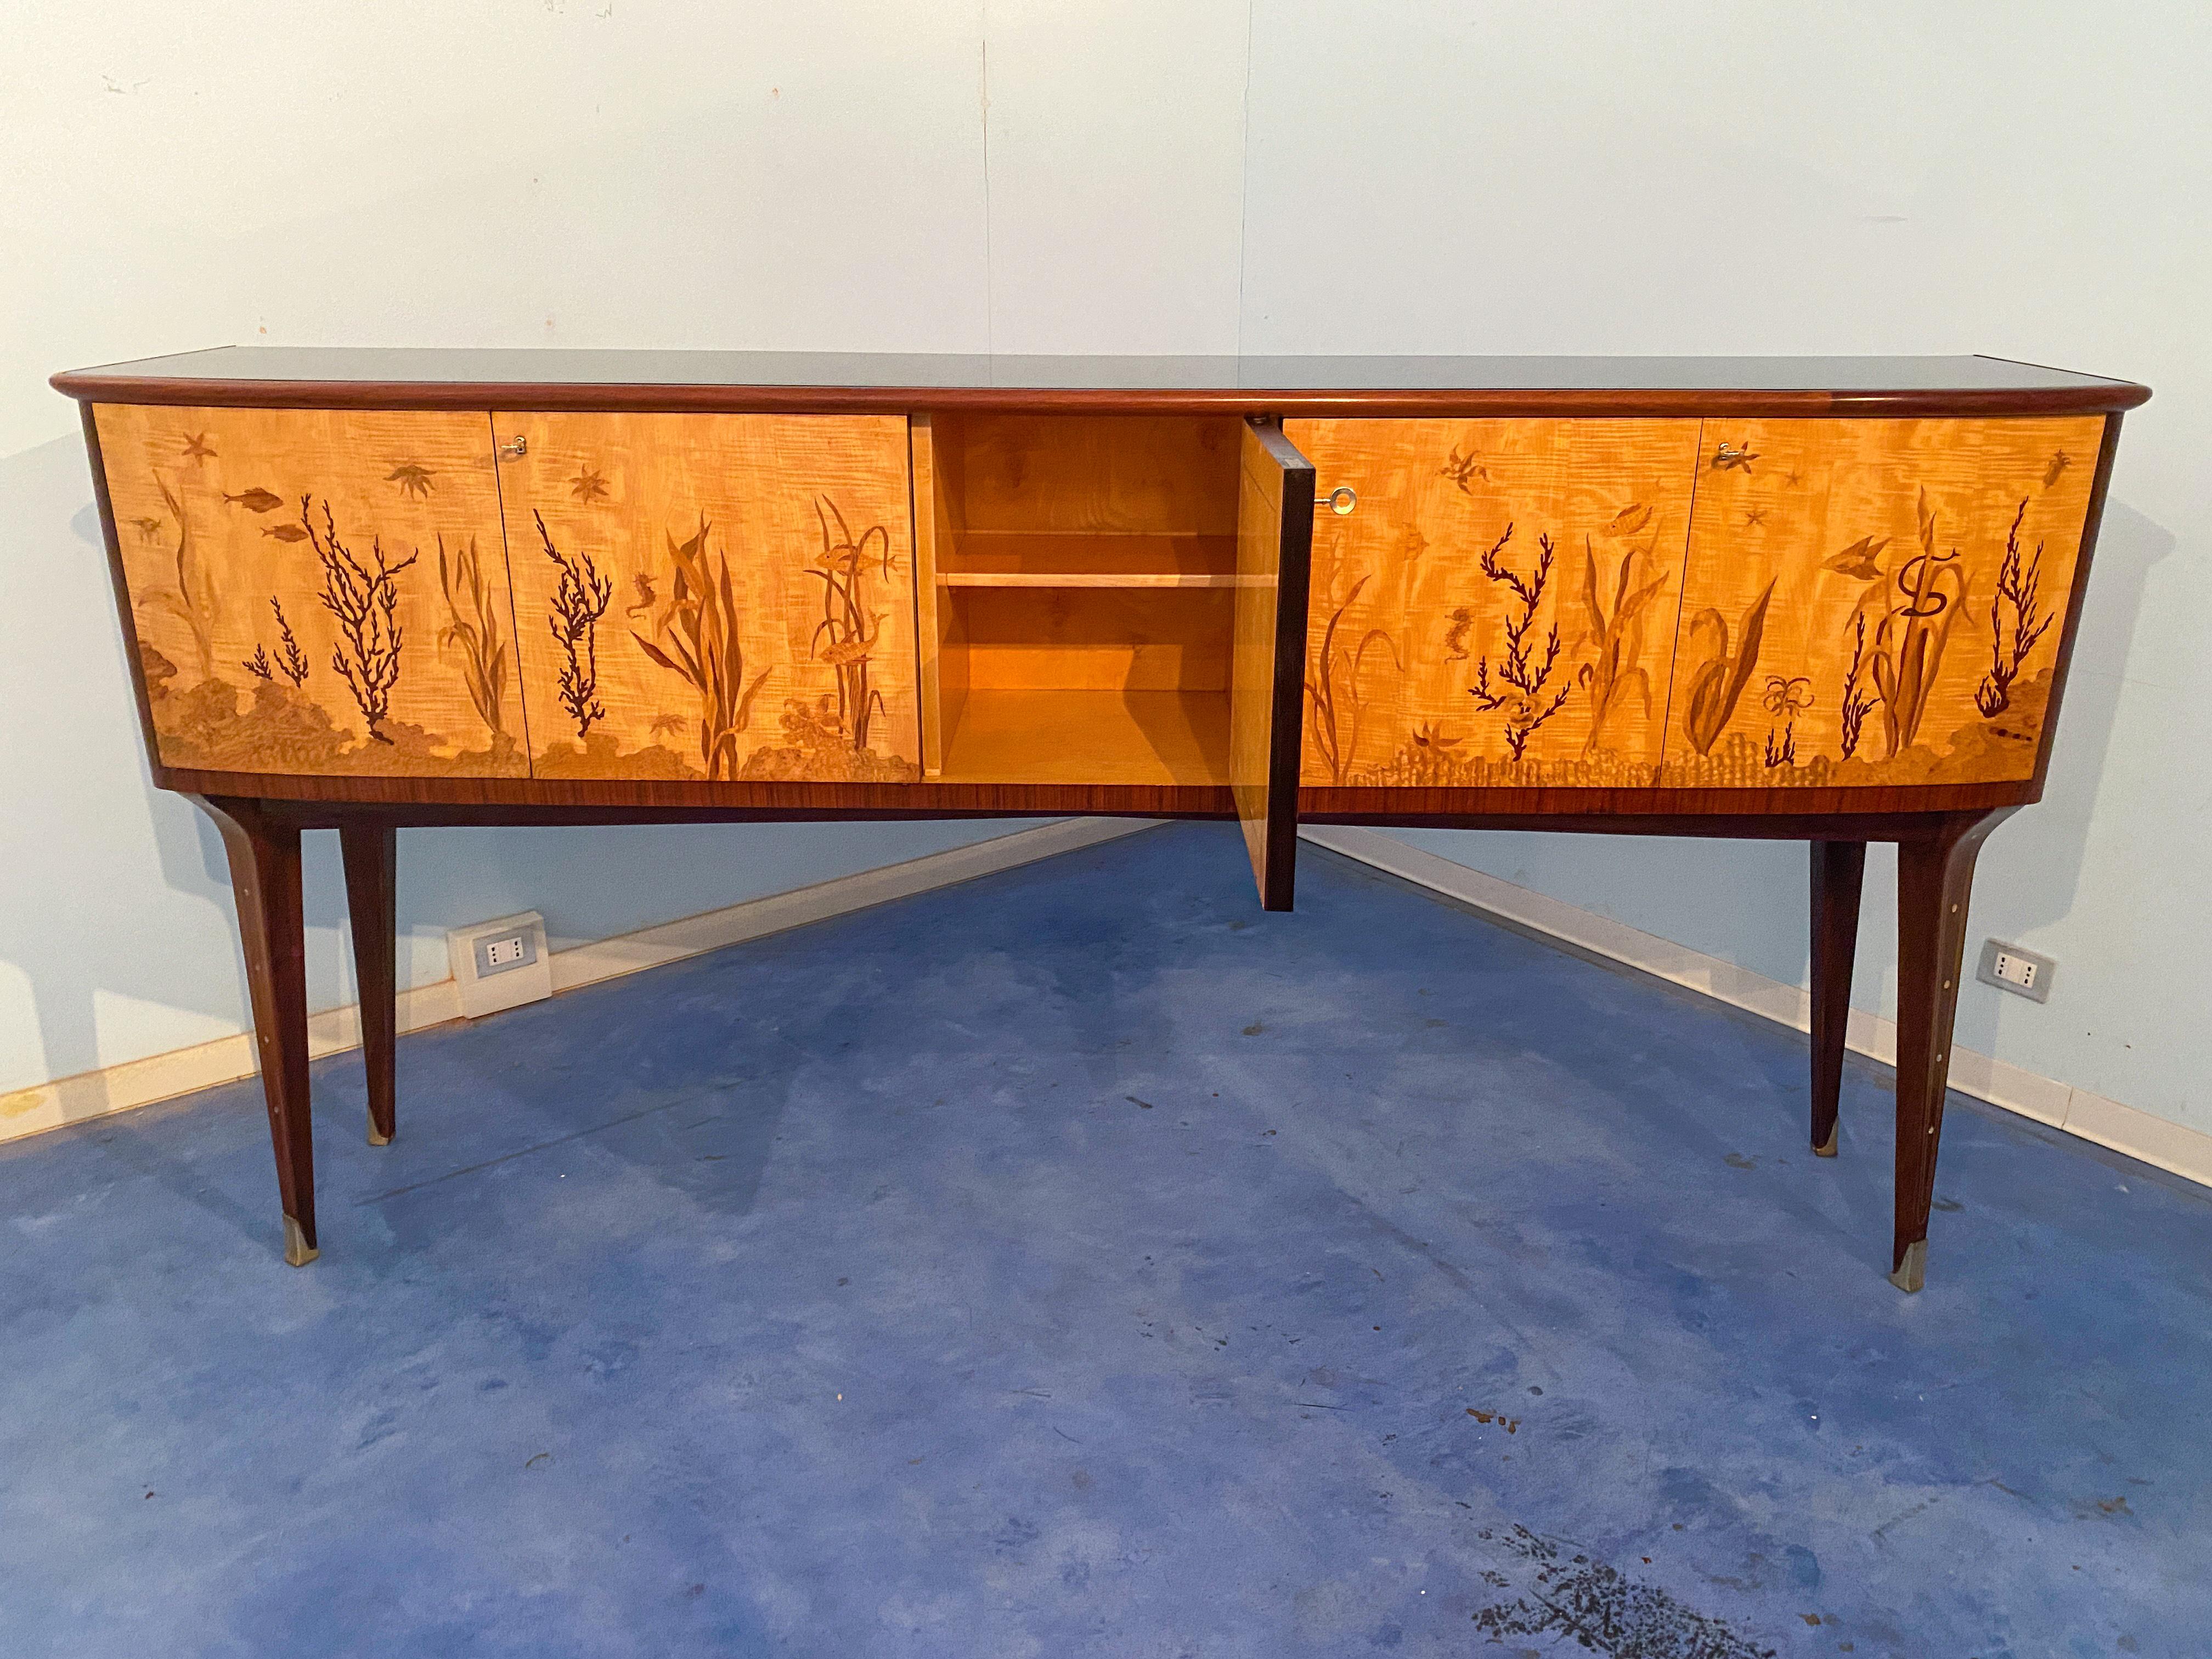 Teak Italian Midcentury Inlaid Maple Sideboard by Andrea Gusmai, 1950s For Sale